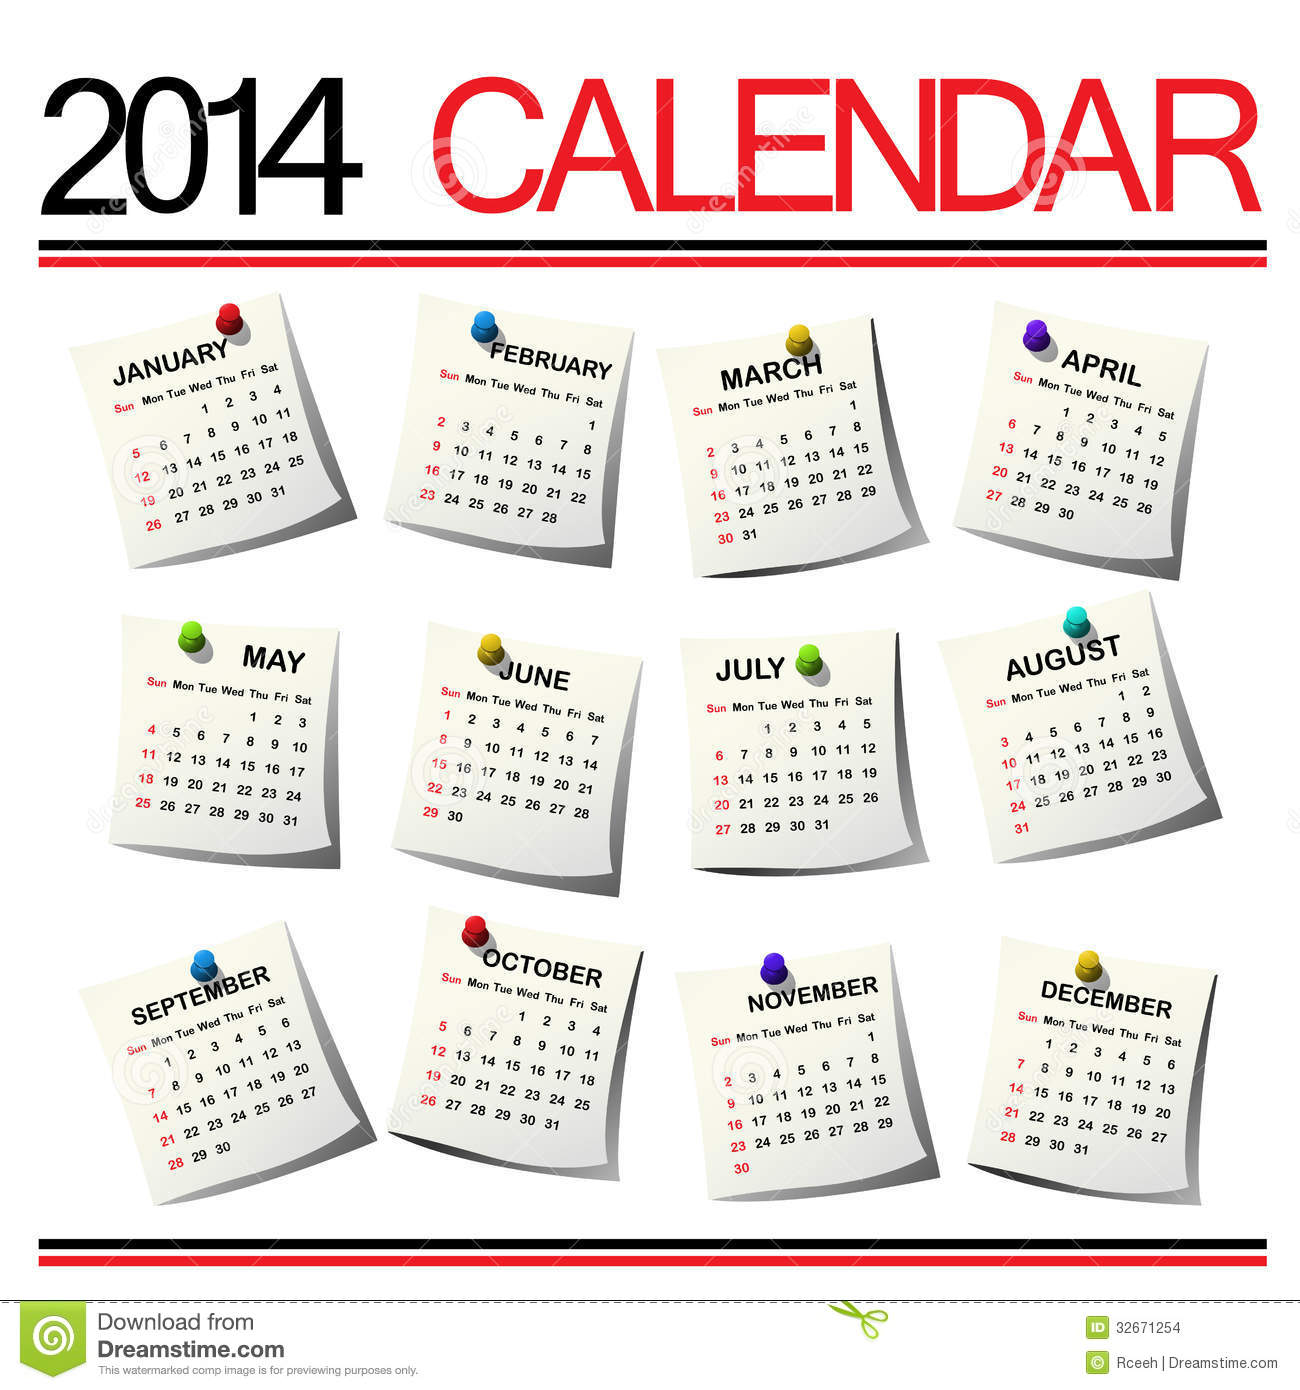 Turn Resolutions Into Reality in 2014!